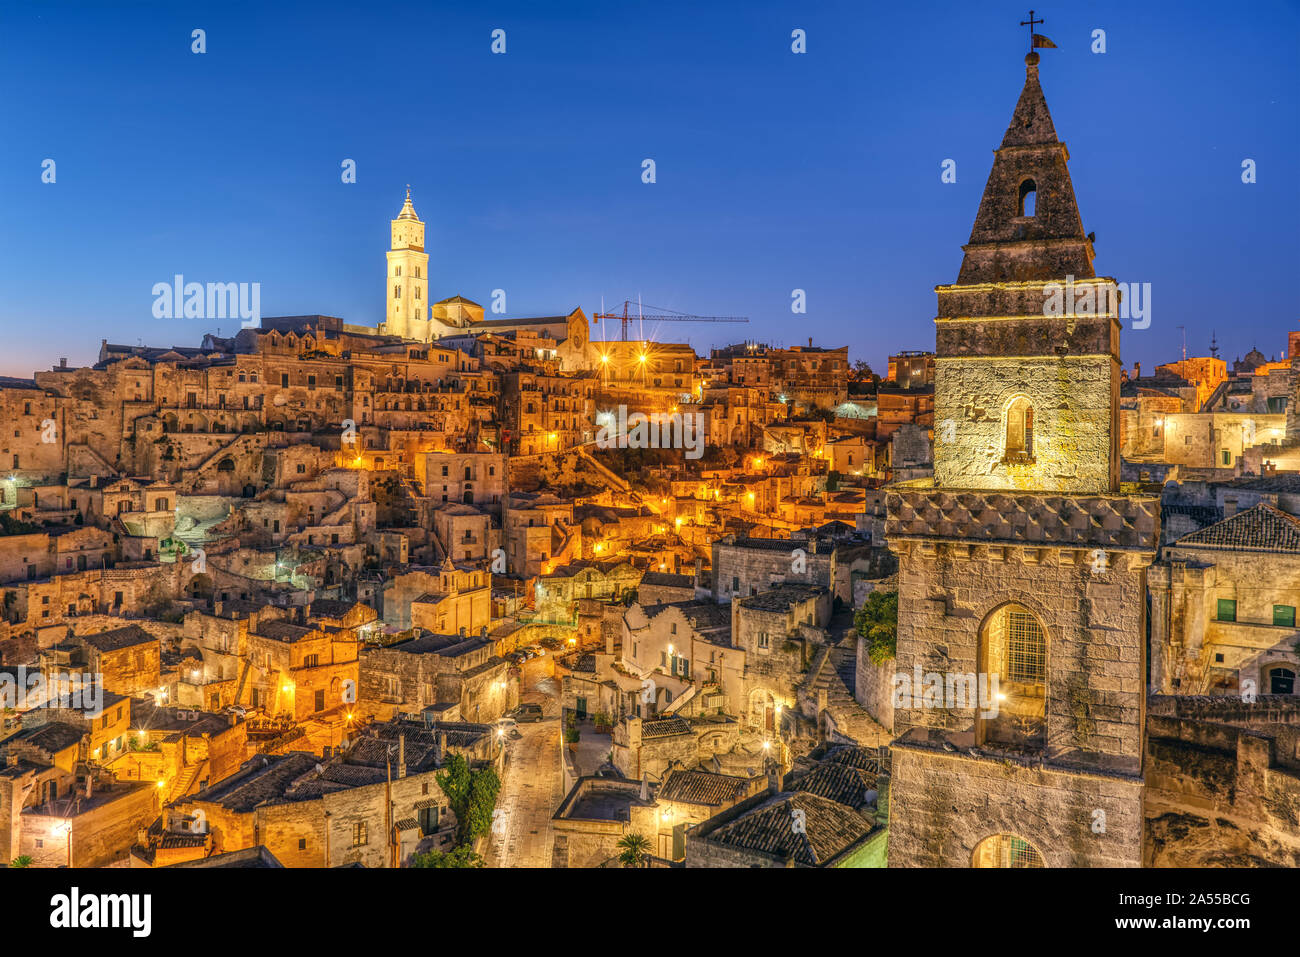 The ancient old town of Matera in southern Italy at night Stock Photo